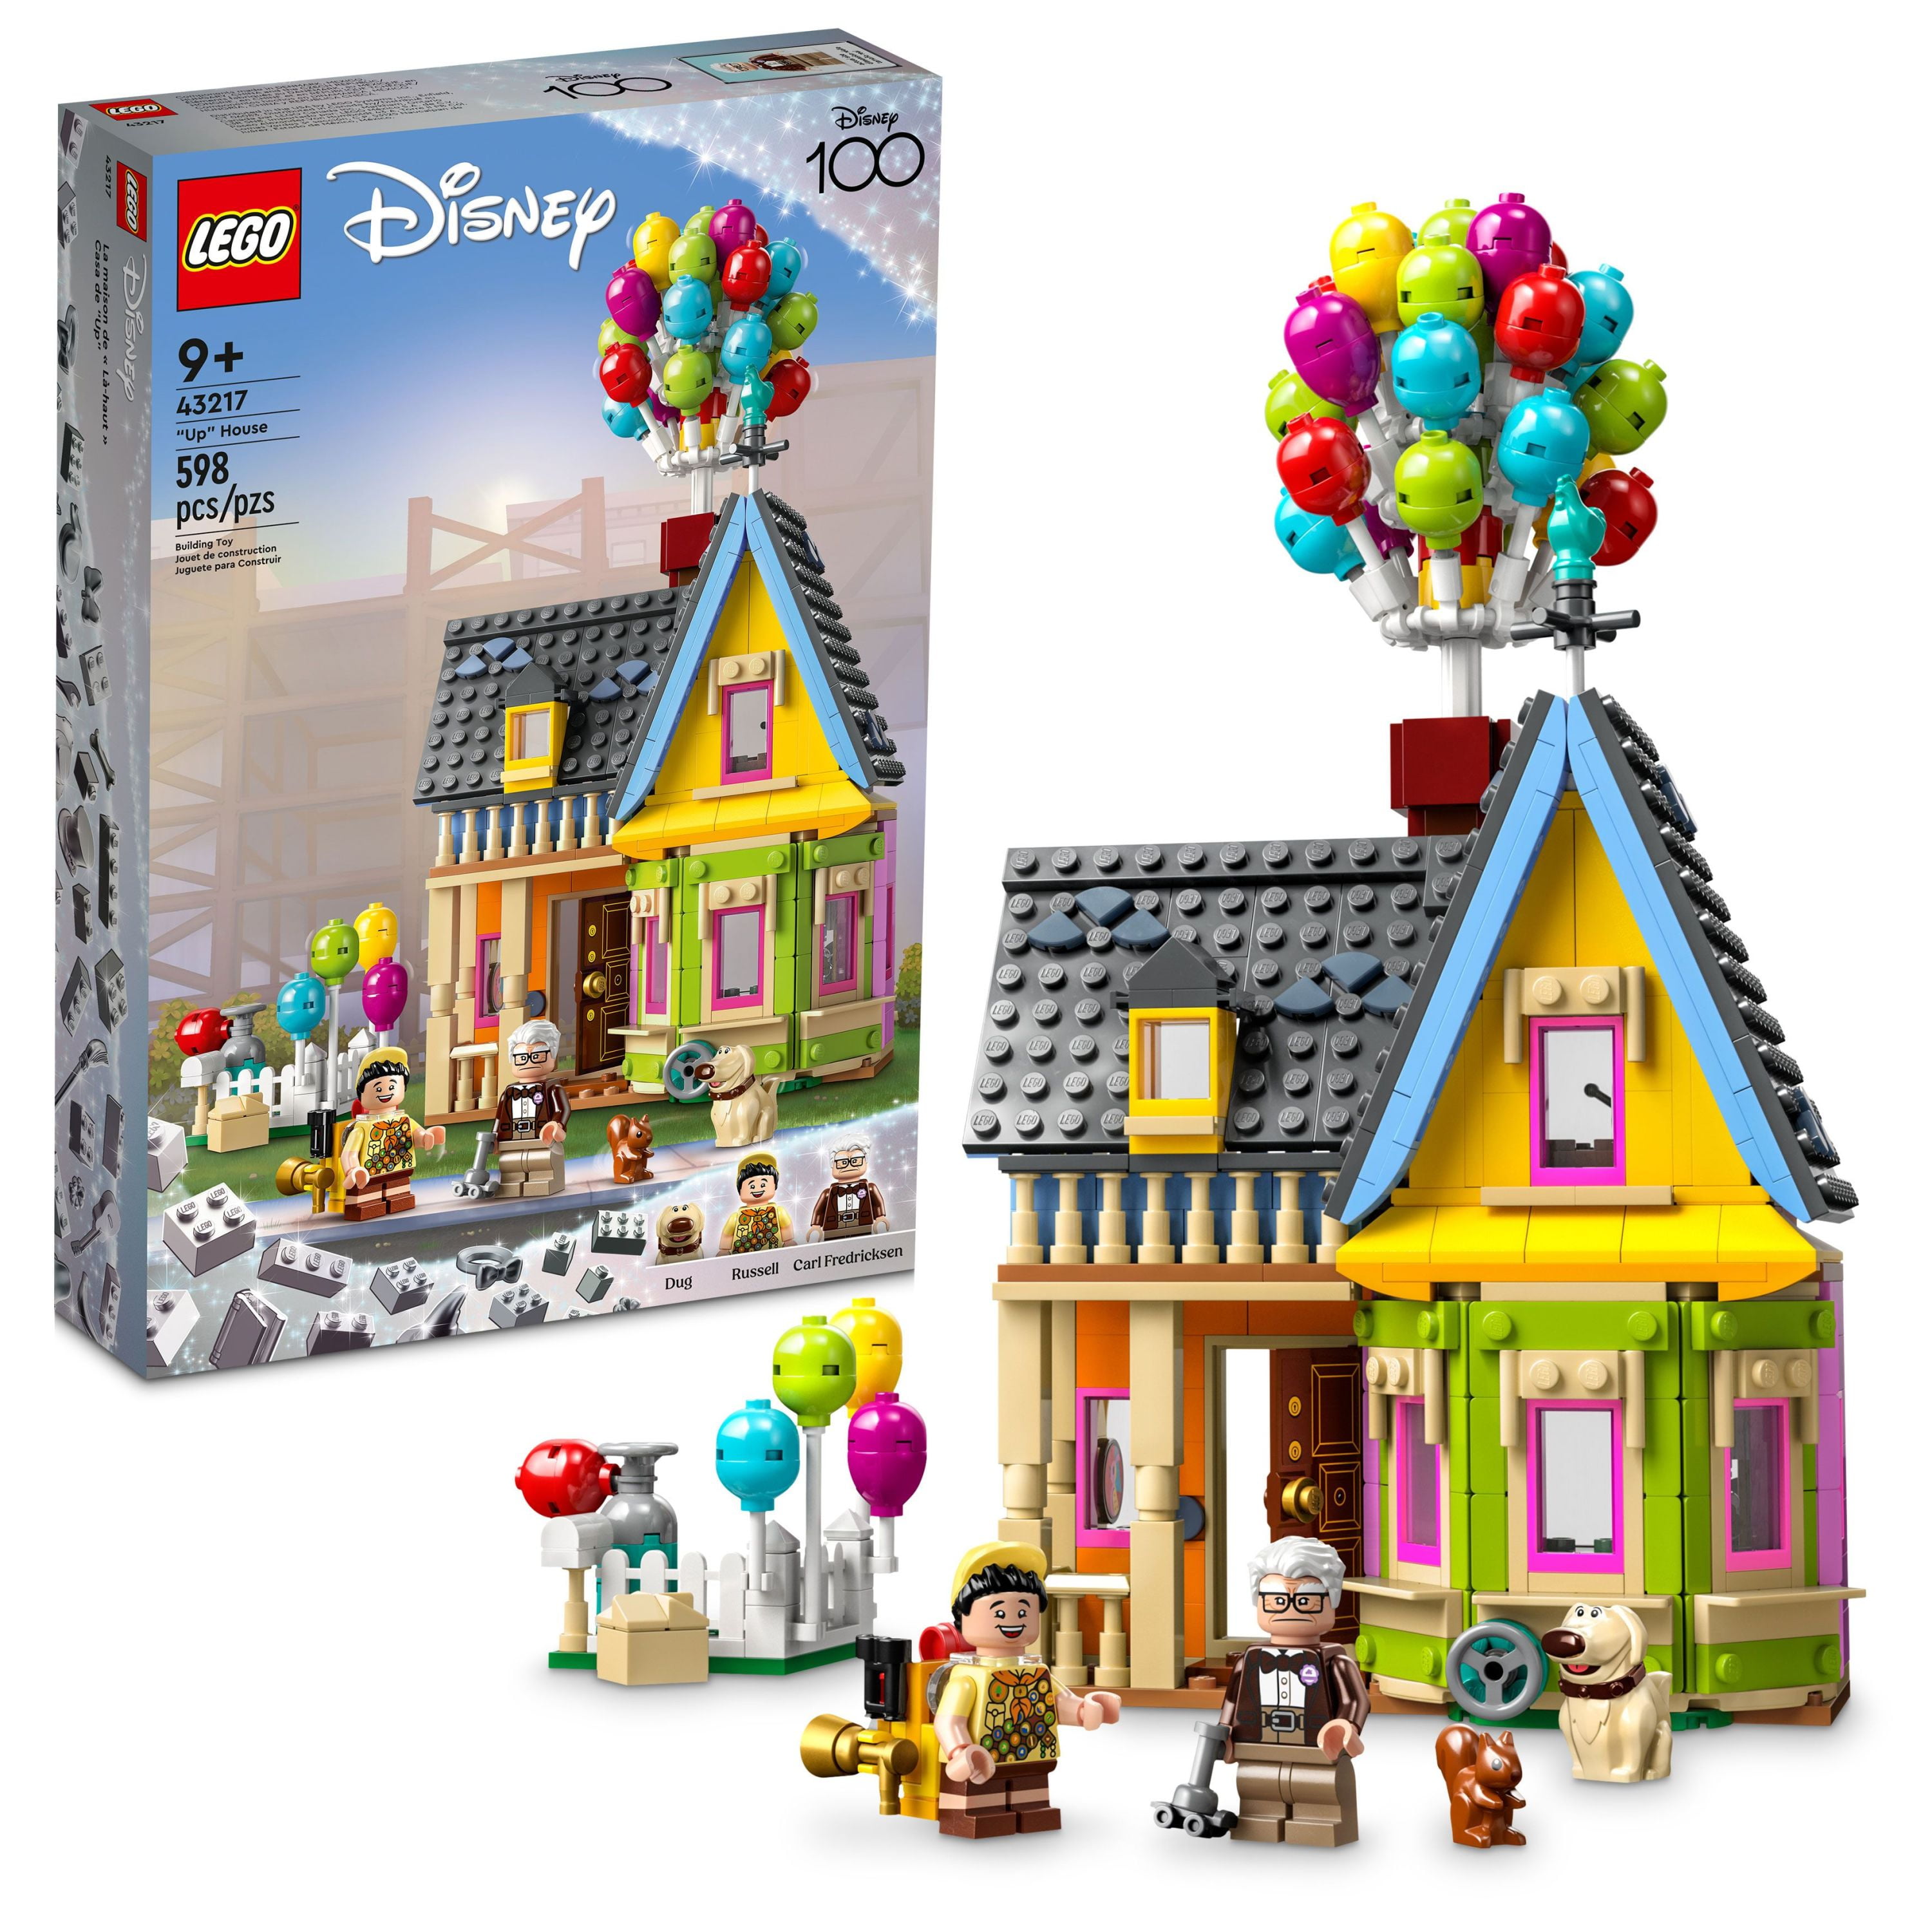 LEGO Disney and Pixar 'Up' House 43217 100 Celebration Building Toy Set Kids and Movie Fans Ages 9+, A Fun Gift for Disney Fans Anyone Who Loves Creative Play - Walmart.com